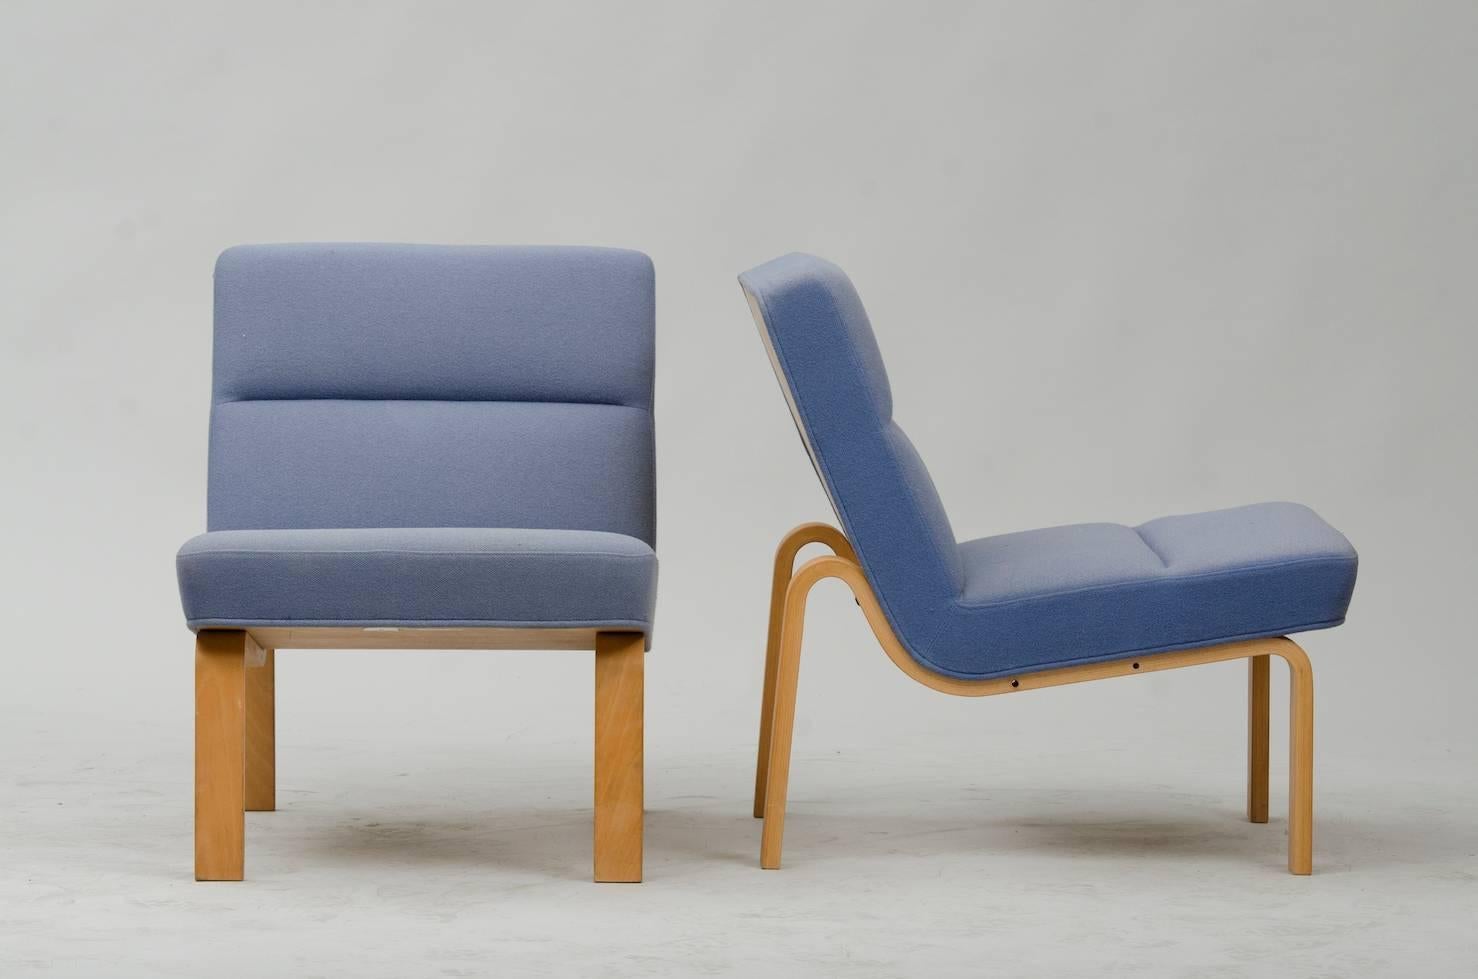 Pair of bent beech and blue fabric chairs.
Three Pairs available, original condition items.
Producer: Magnus Olesen
We have a large stock of unrestored pieces and we decided to publish it, the price shown is in the original condition.
We have